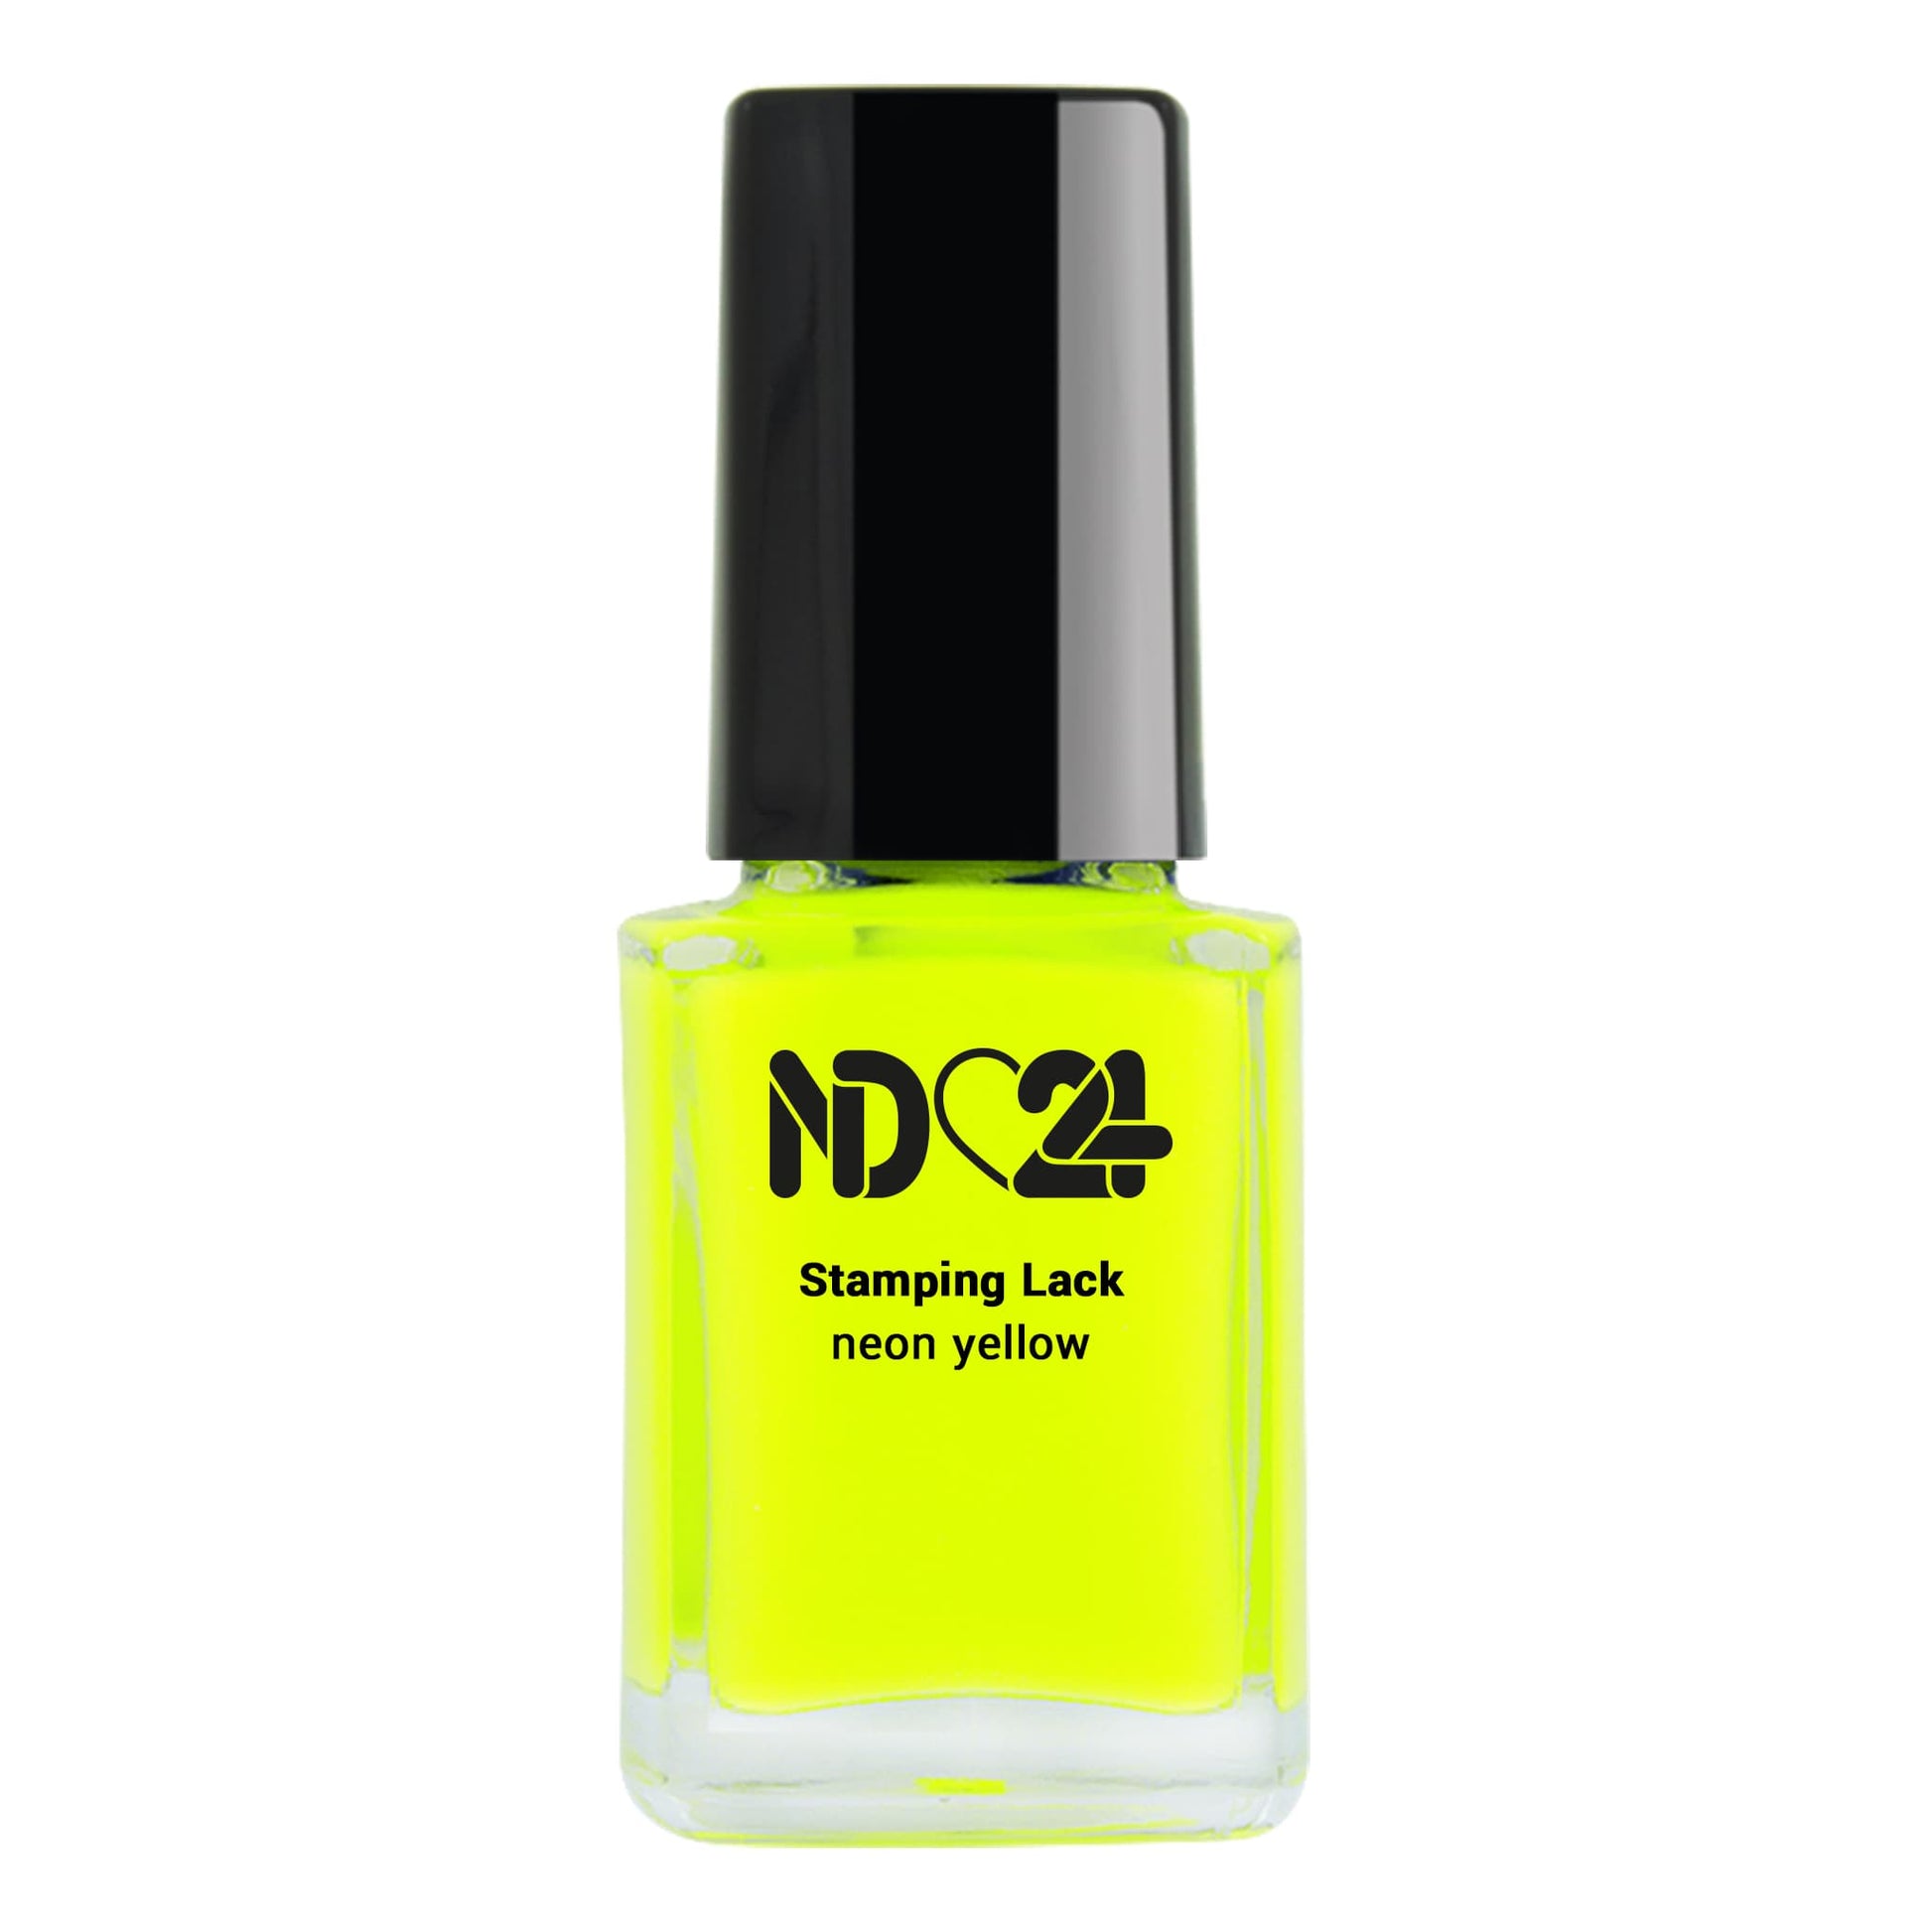 Stamping Lack neon yellow